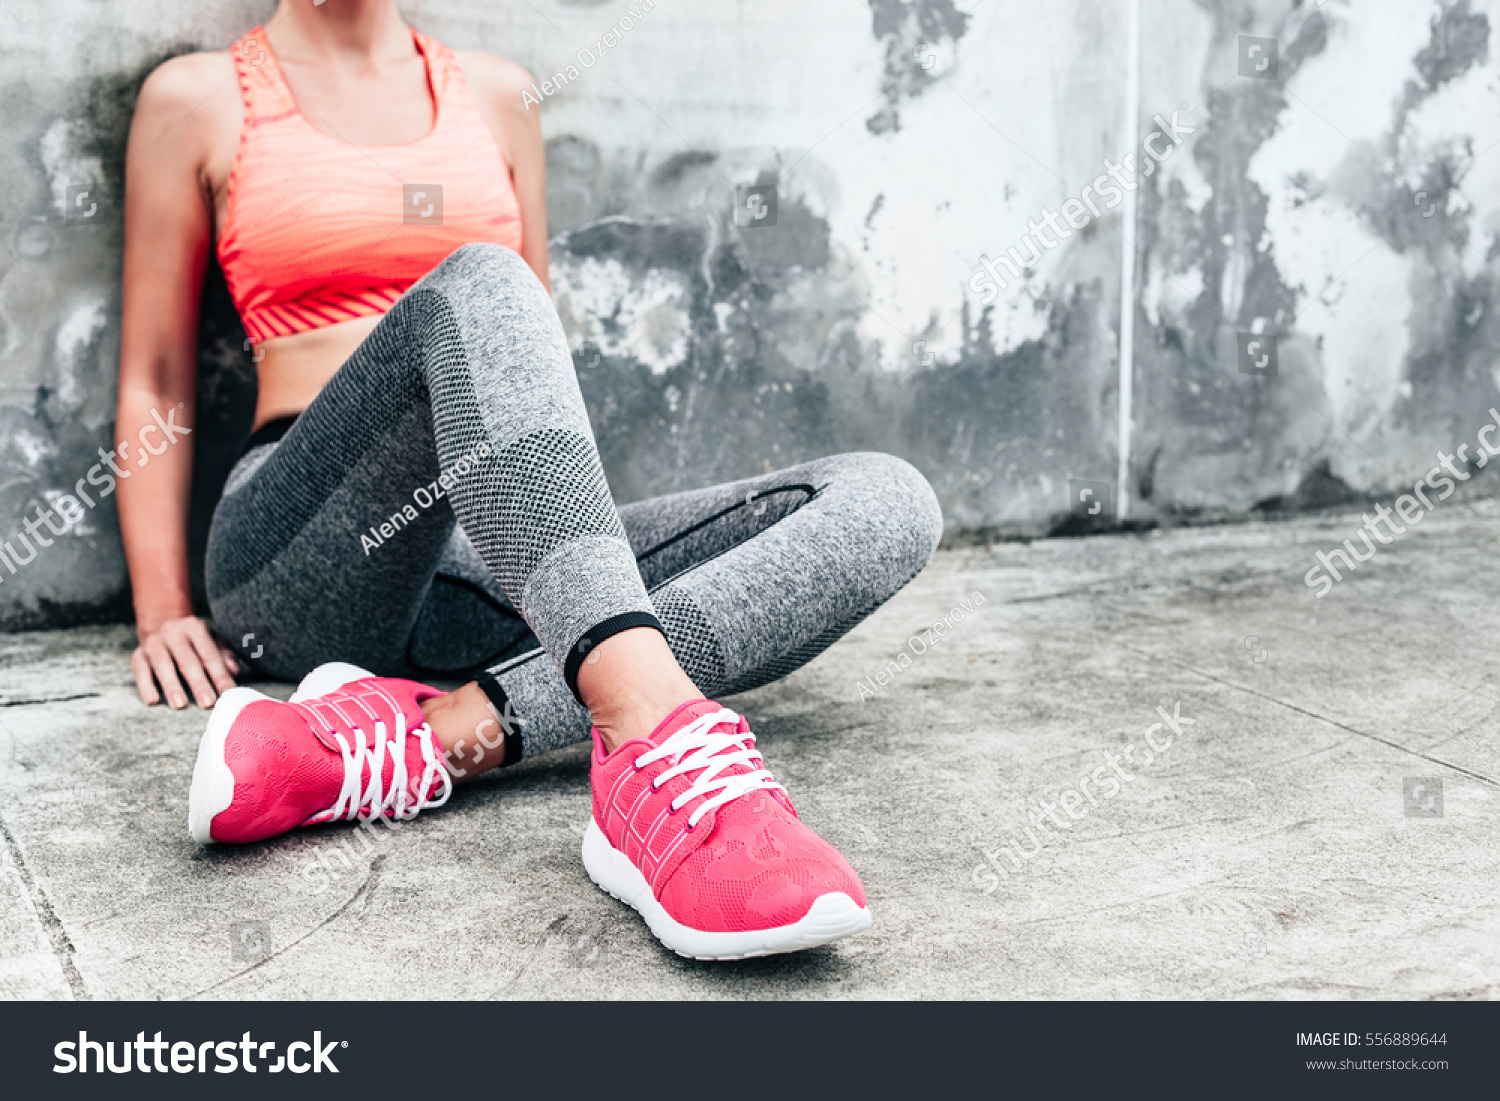 Fitness sport woman in fashion sportswear doing yoga fitness exercise in the city street over gray concrete background. Outdoor sports clothing and shoes, urban style. Sneakers closeup. #556889644